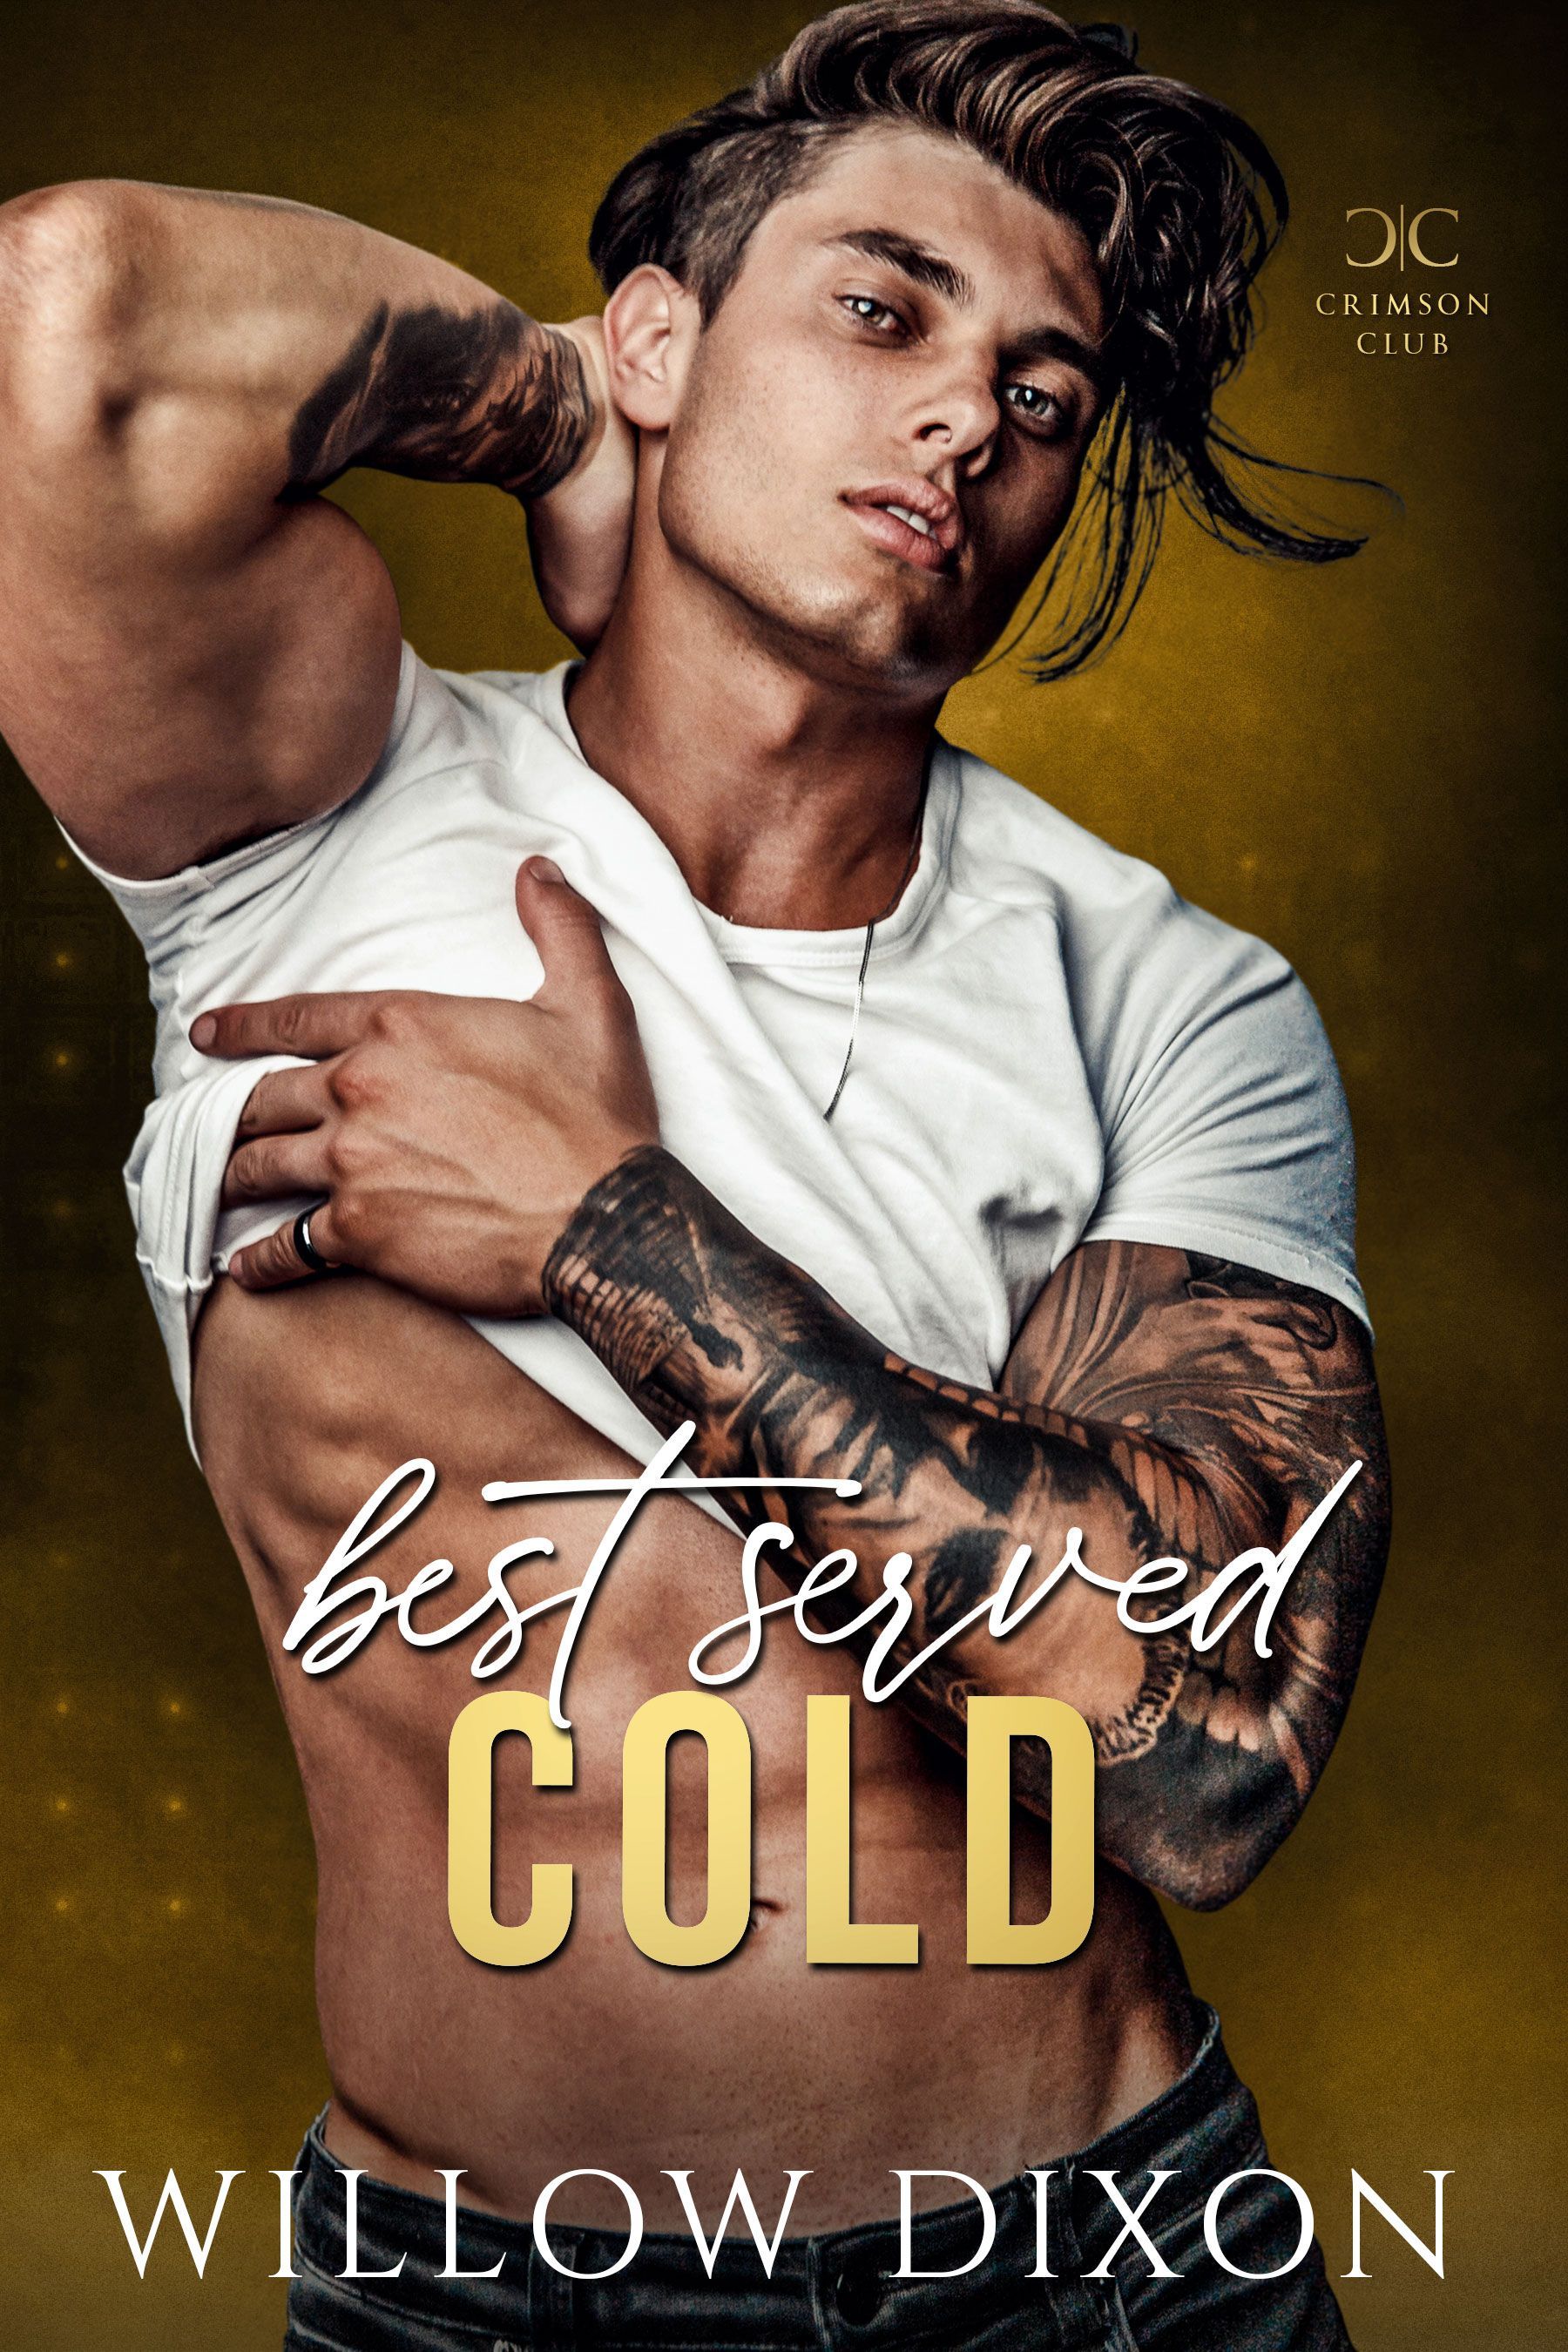 A shirtless man with tattoos on his arms and chest is on the cover of a book.